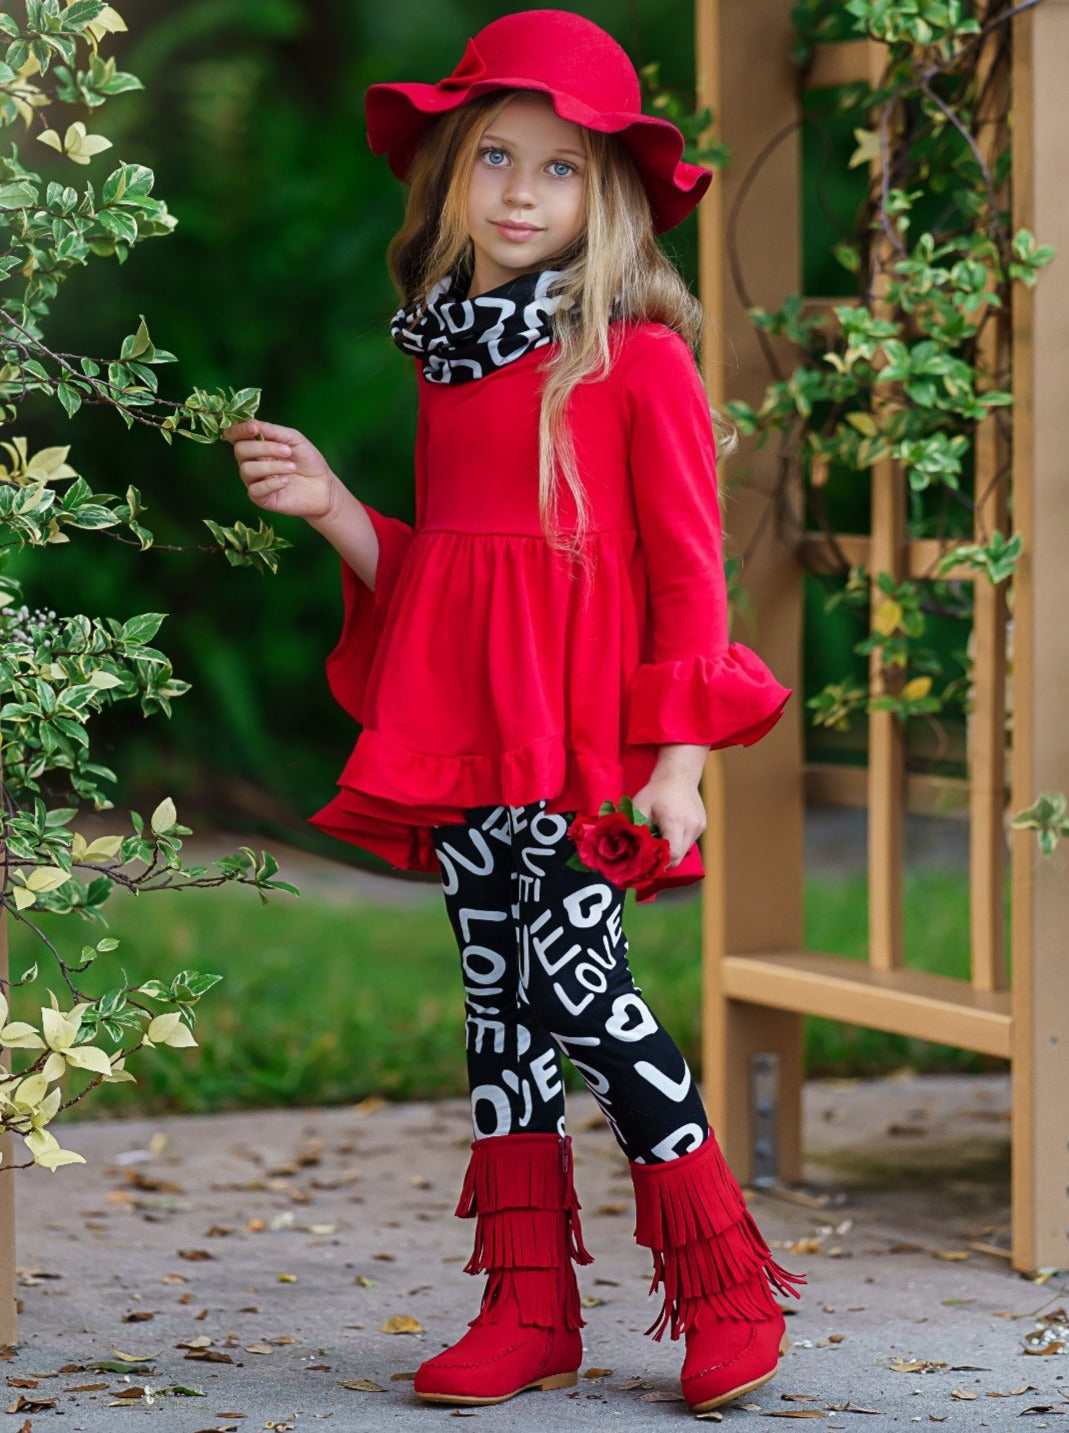 Toddler Valentine's Outfits | Love Hi-Lo Tunic, Scarf & Legging Set